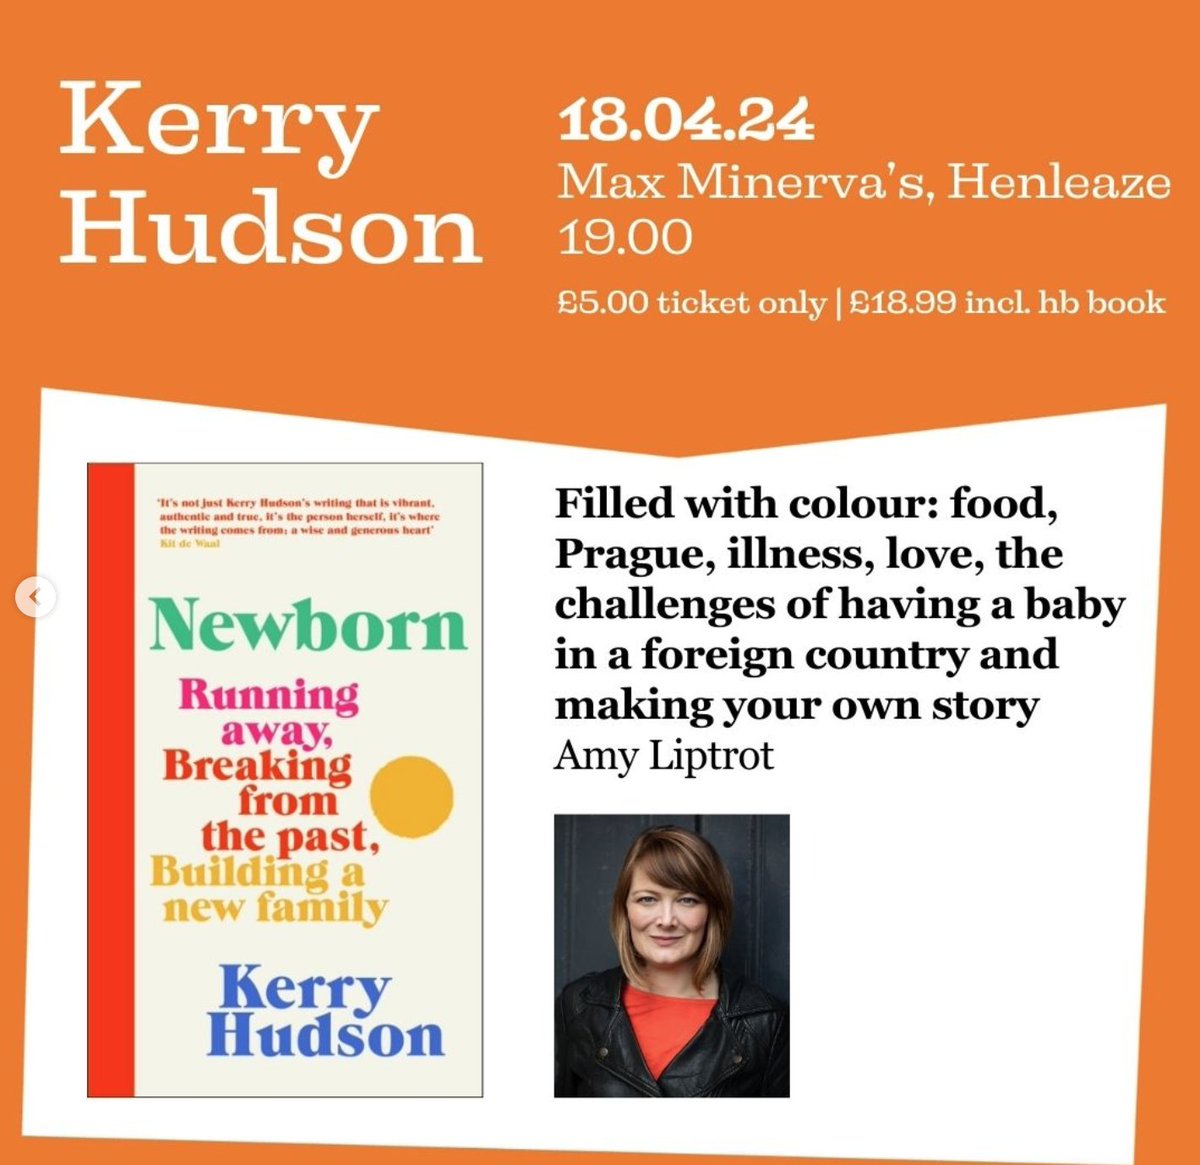 4 days until this at @maxminervas in Henleaze, Bristol. Come listen to @ThatKerryHudson discuss her brilliant new memoir NEWBORN: about becoming a mother after a traumatic childhood & having a baby in a foreign country IN THE MIDDLE OF COVID 🙃. 🎟️ maxminervas.co.uk/products/event…